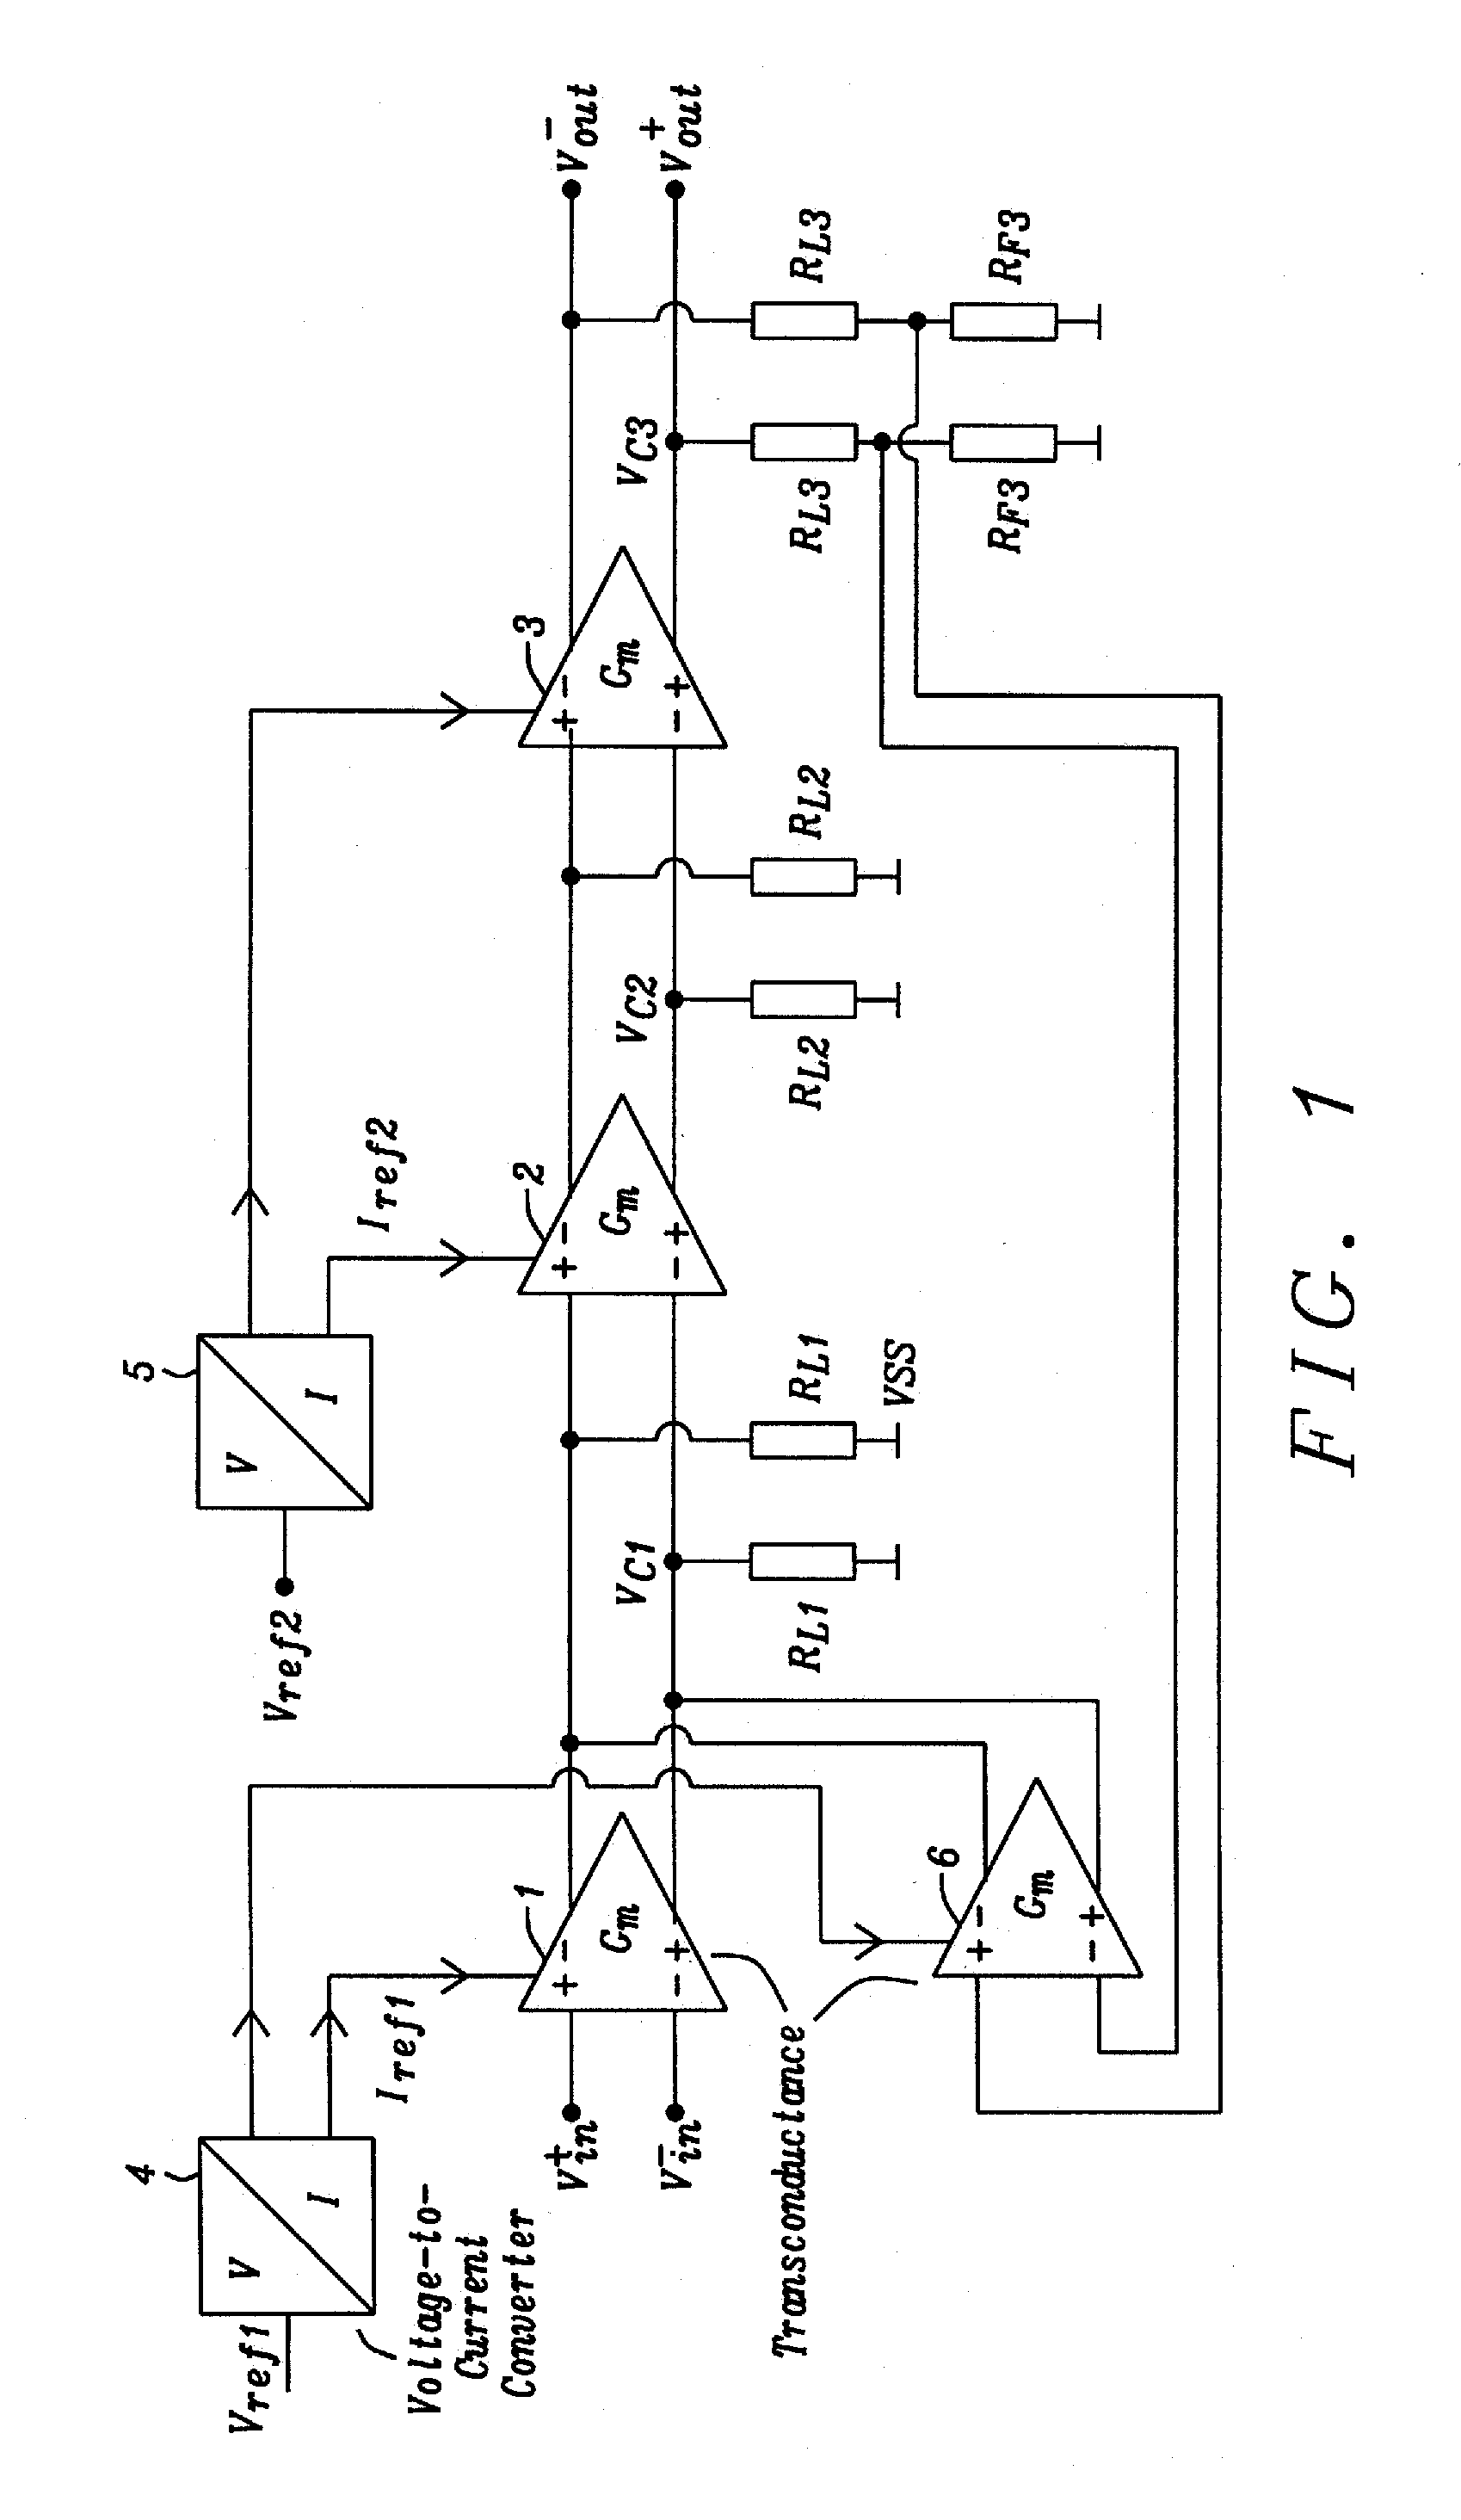 Multi-Stage Fully Differential Amplifier with Controlled Common Mode Voltage